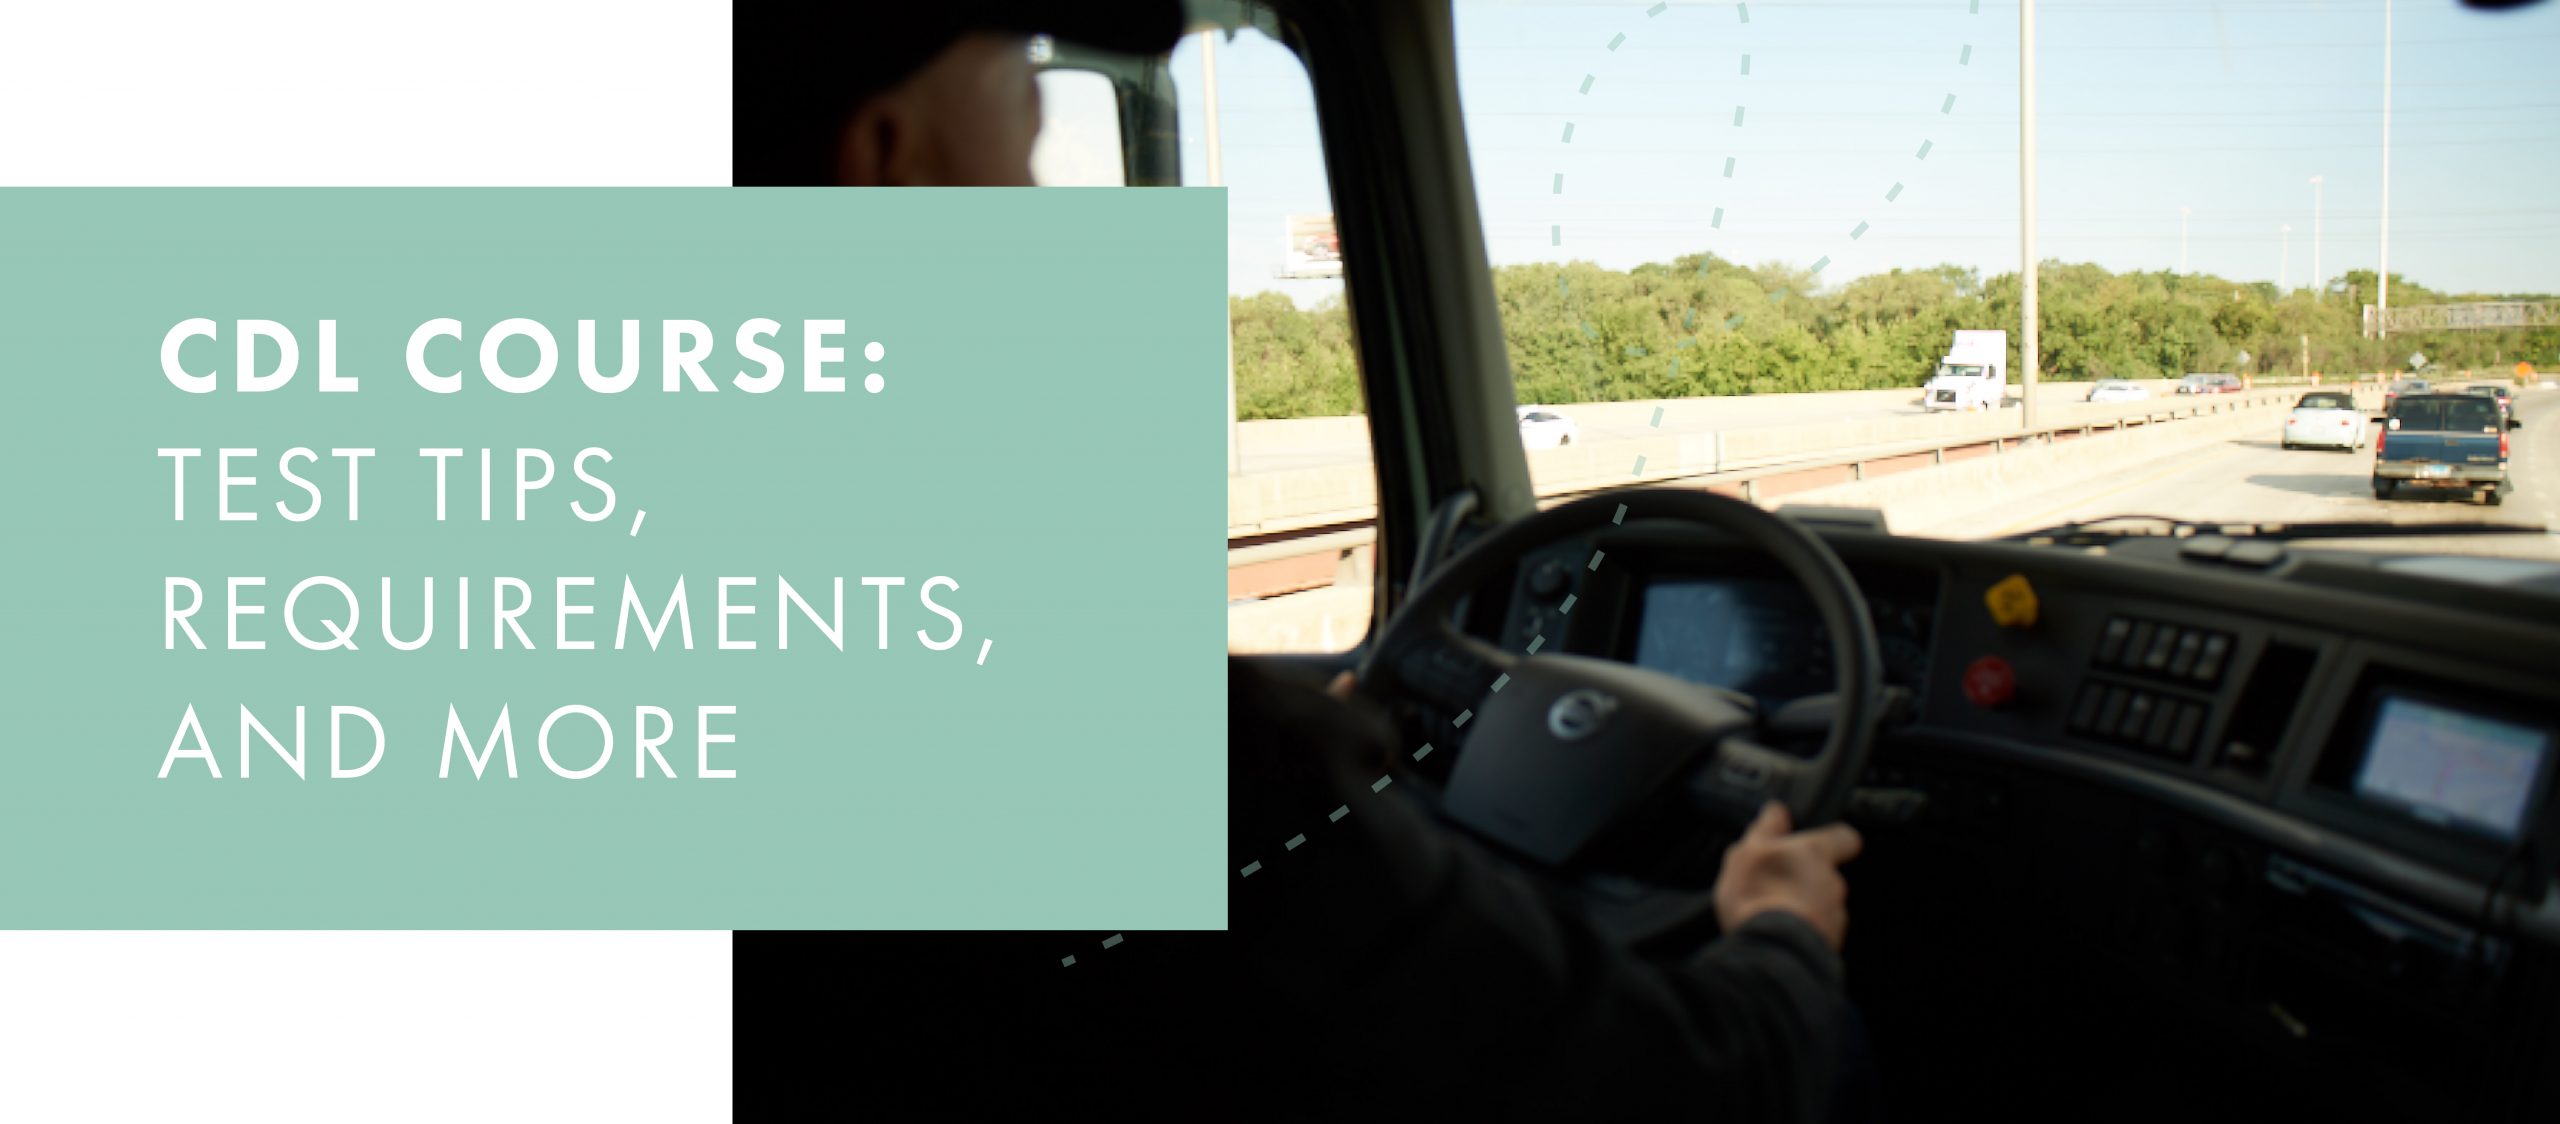 What to Expect in a CDL Course: Test Tips, Requirements, and More